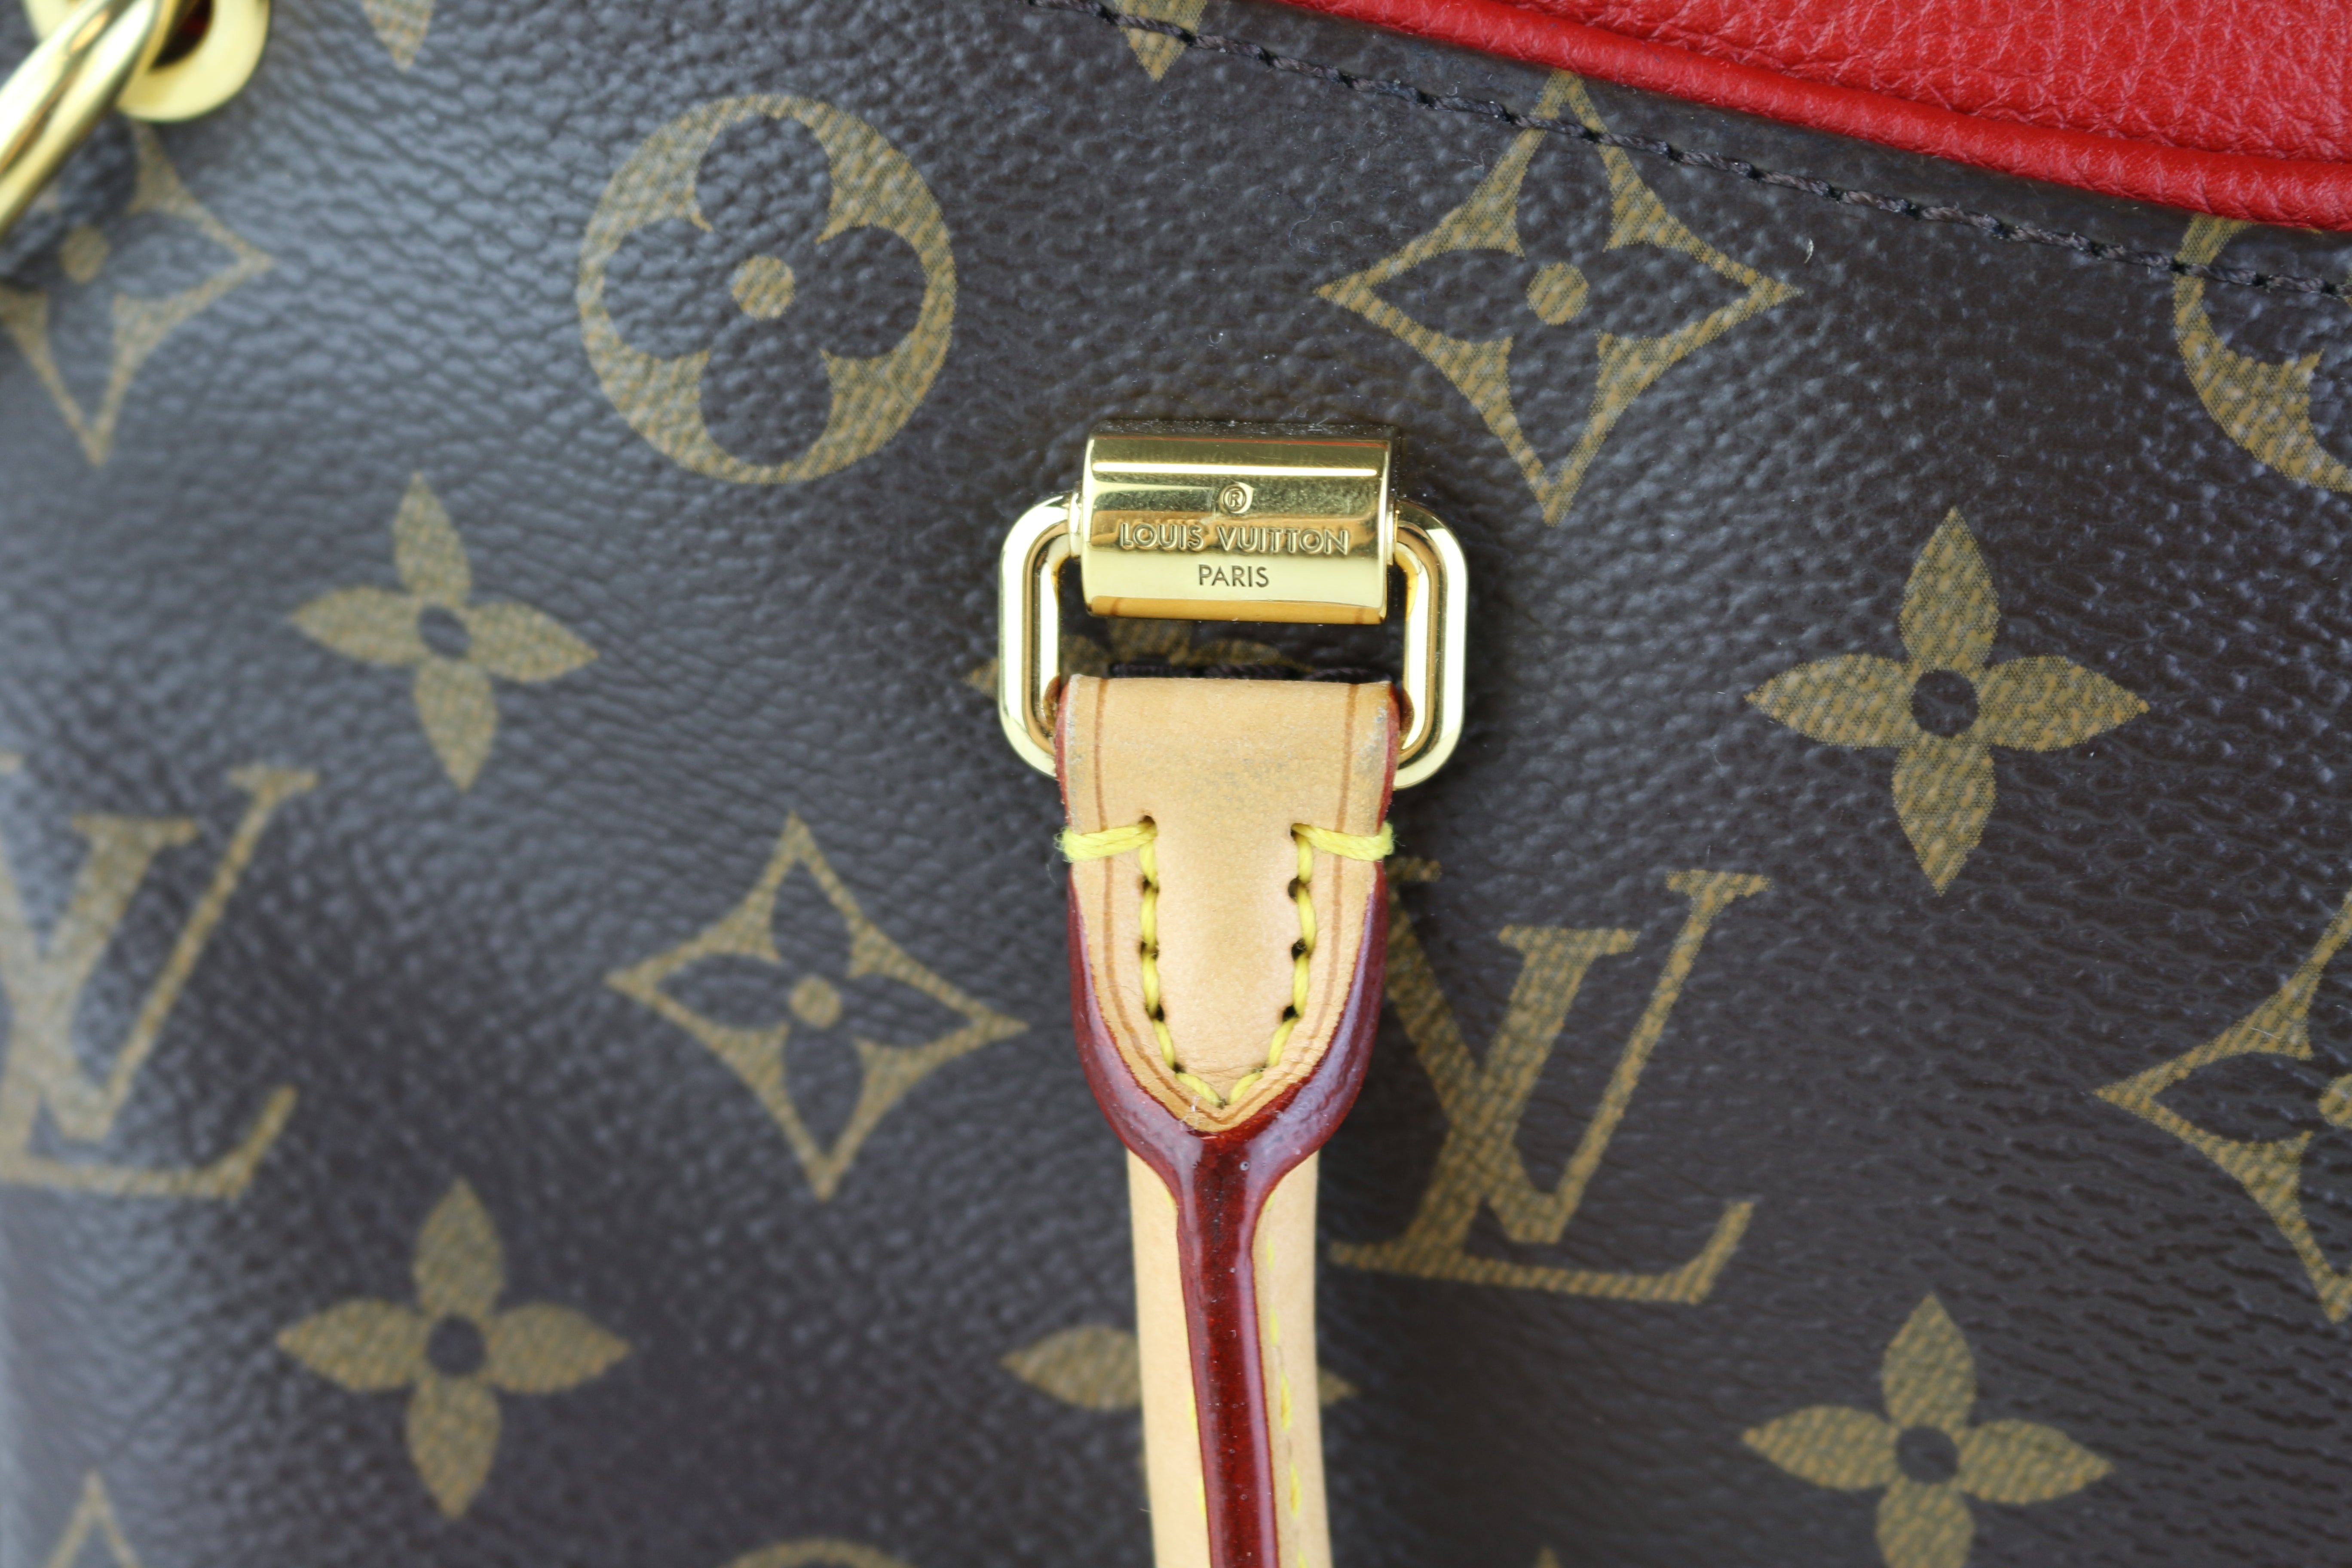 Brown Monogram Coated Canvas and Cerise Leather Pallas BB Gold Hardware,  2019